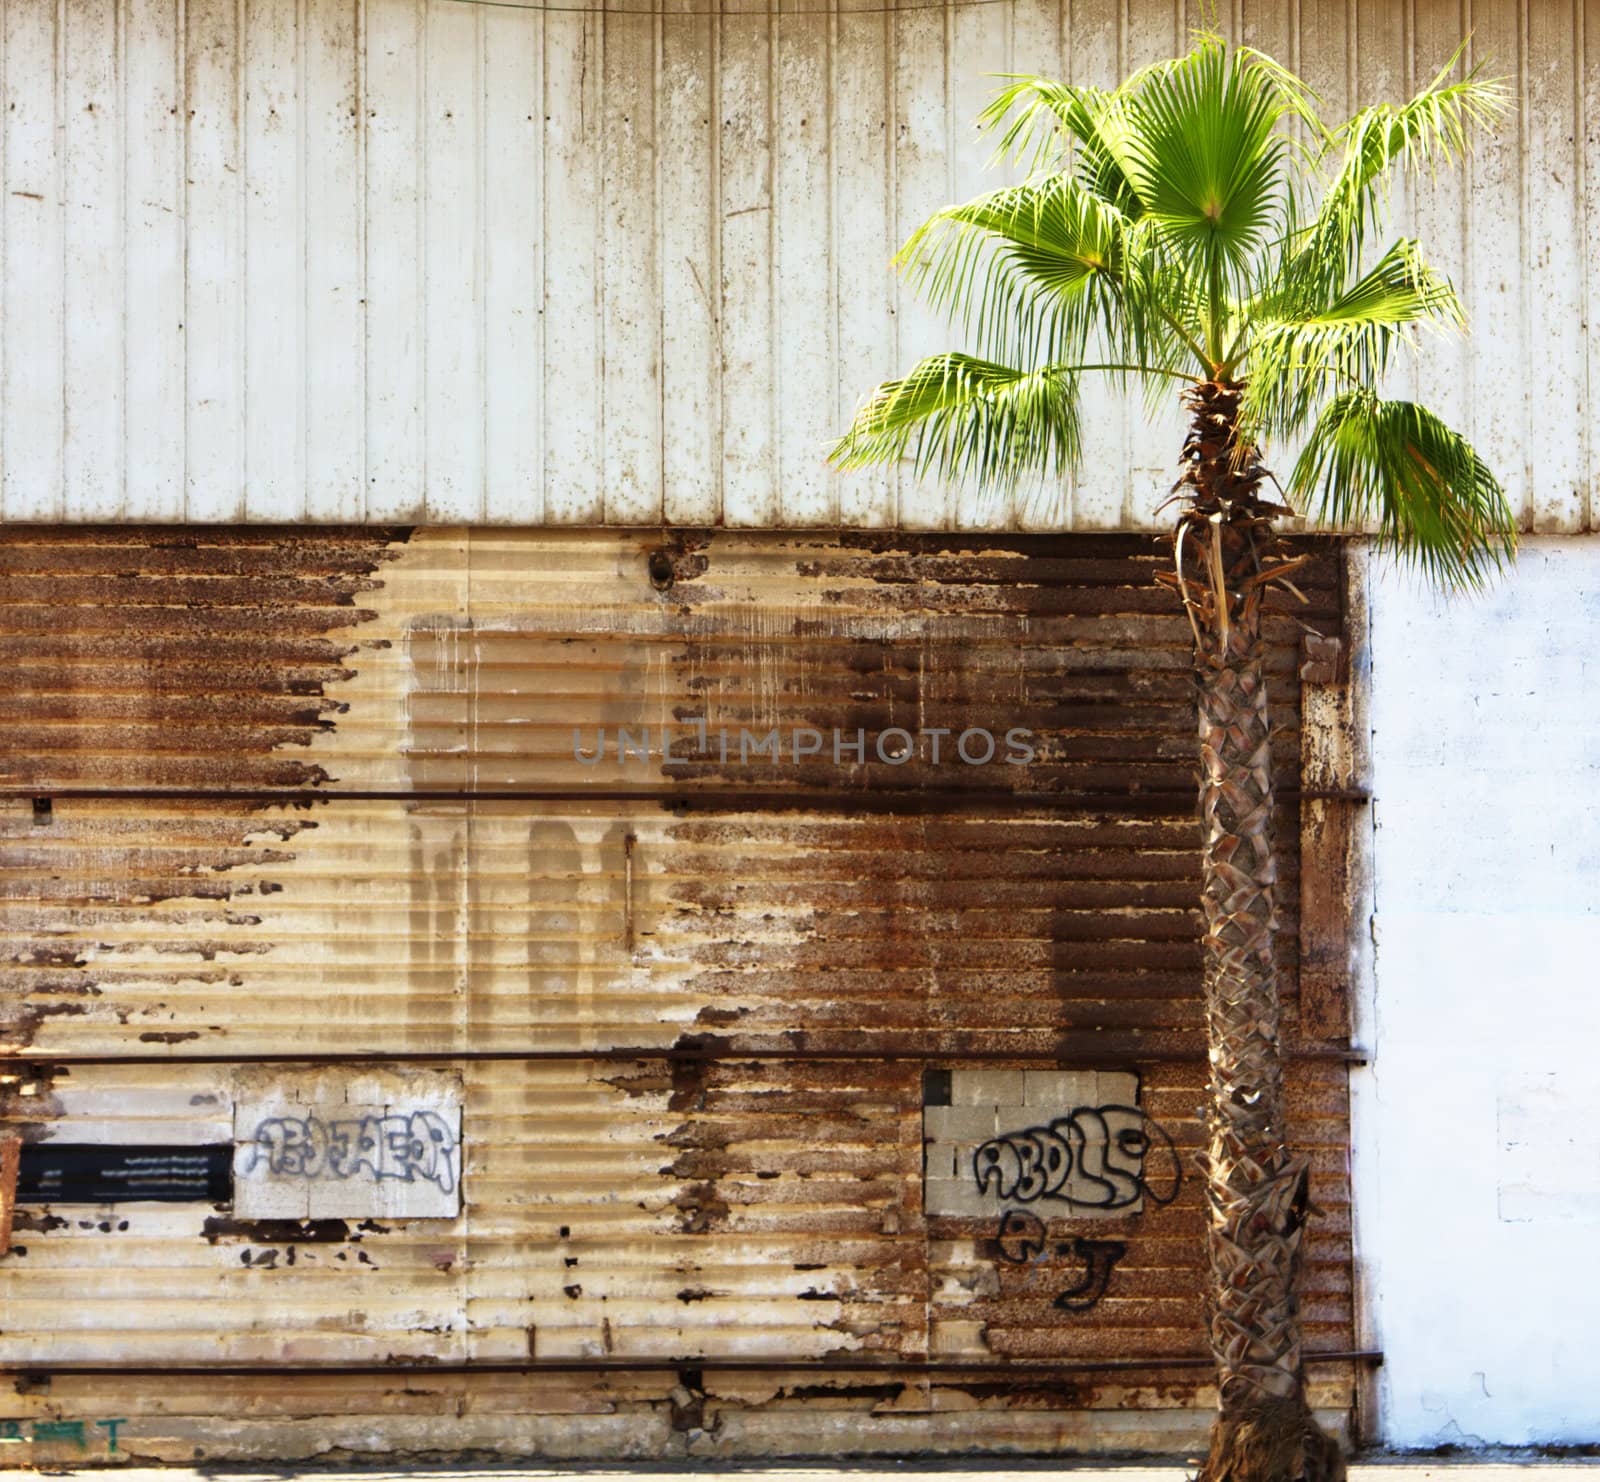 Grungy wall and a palm tree at the side